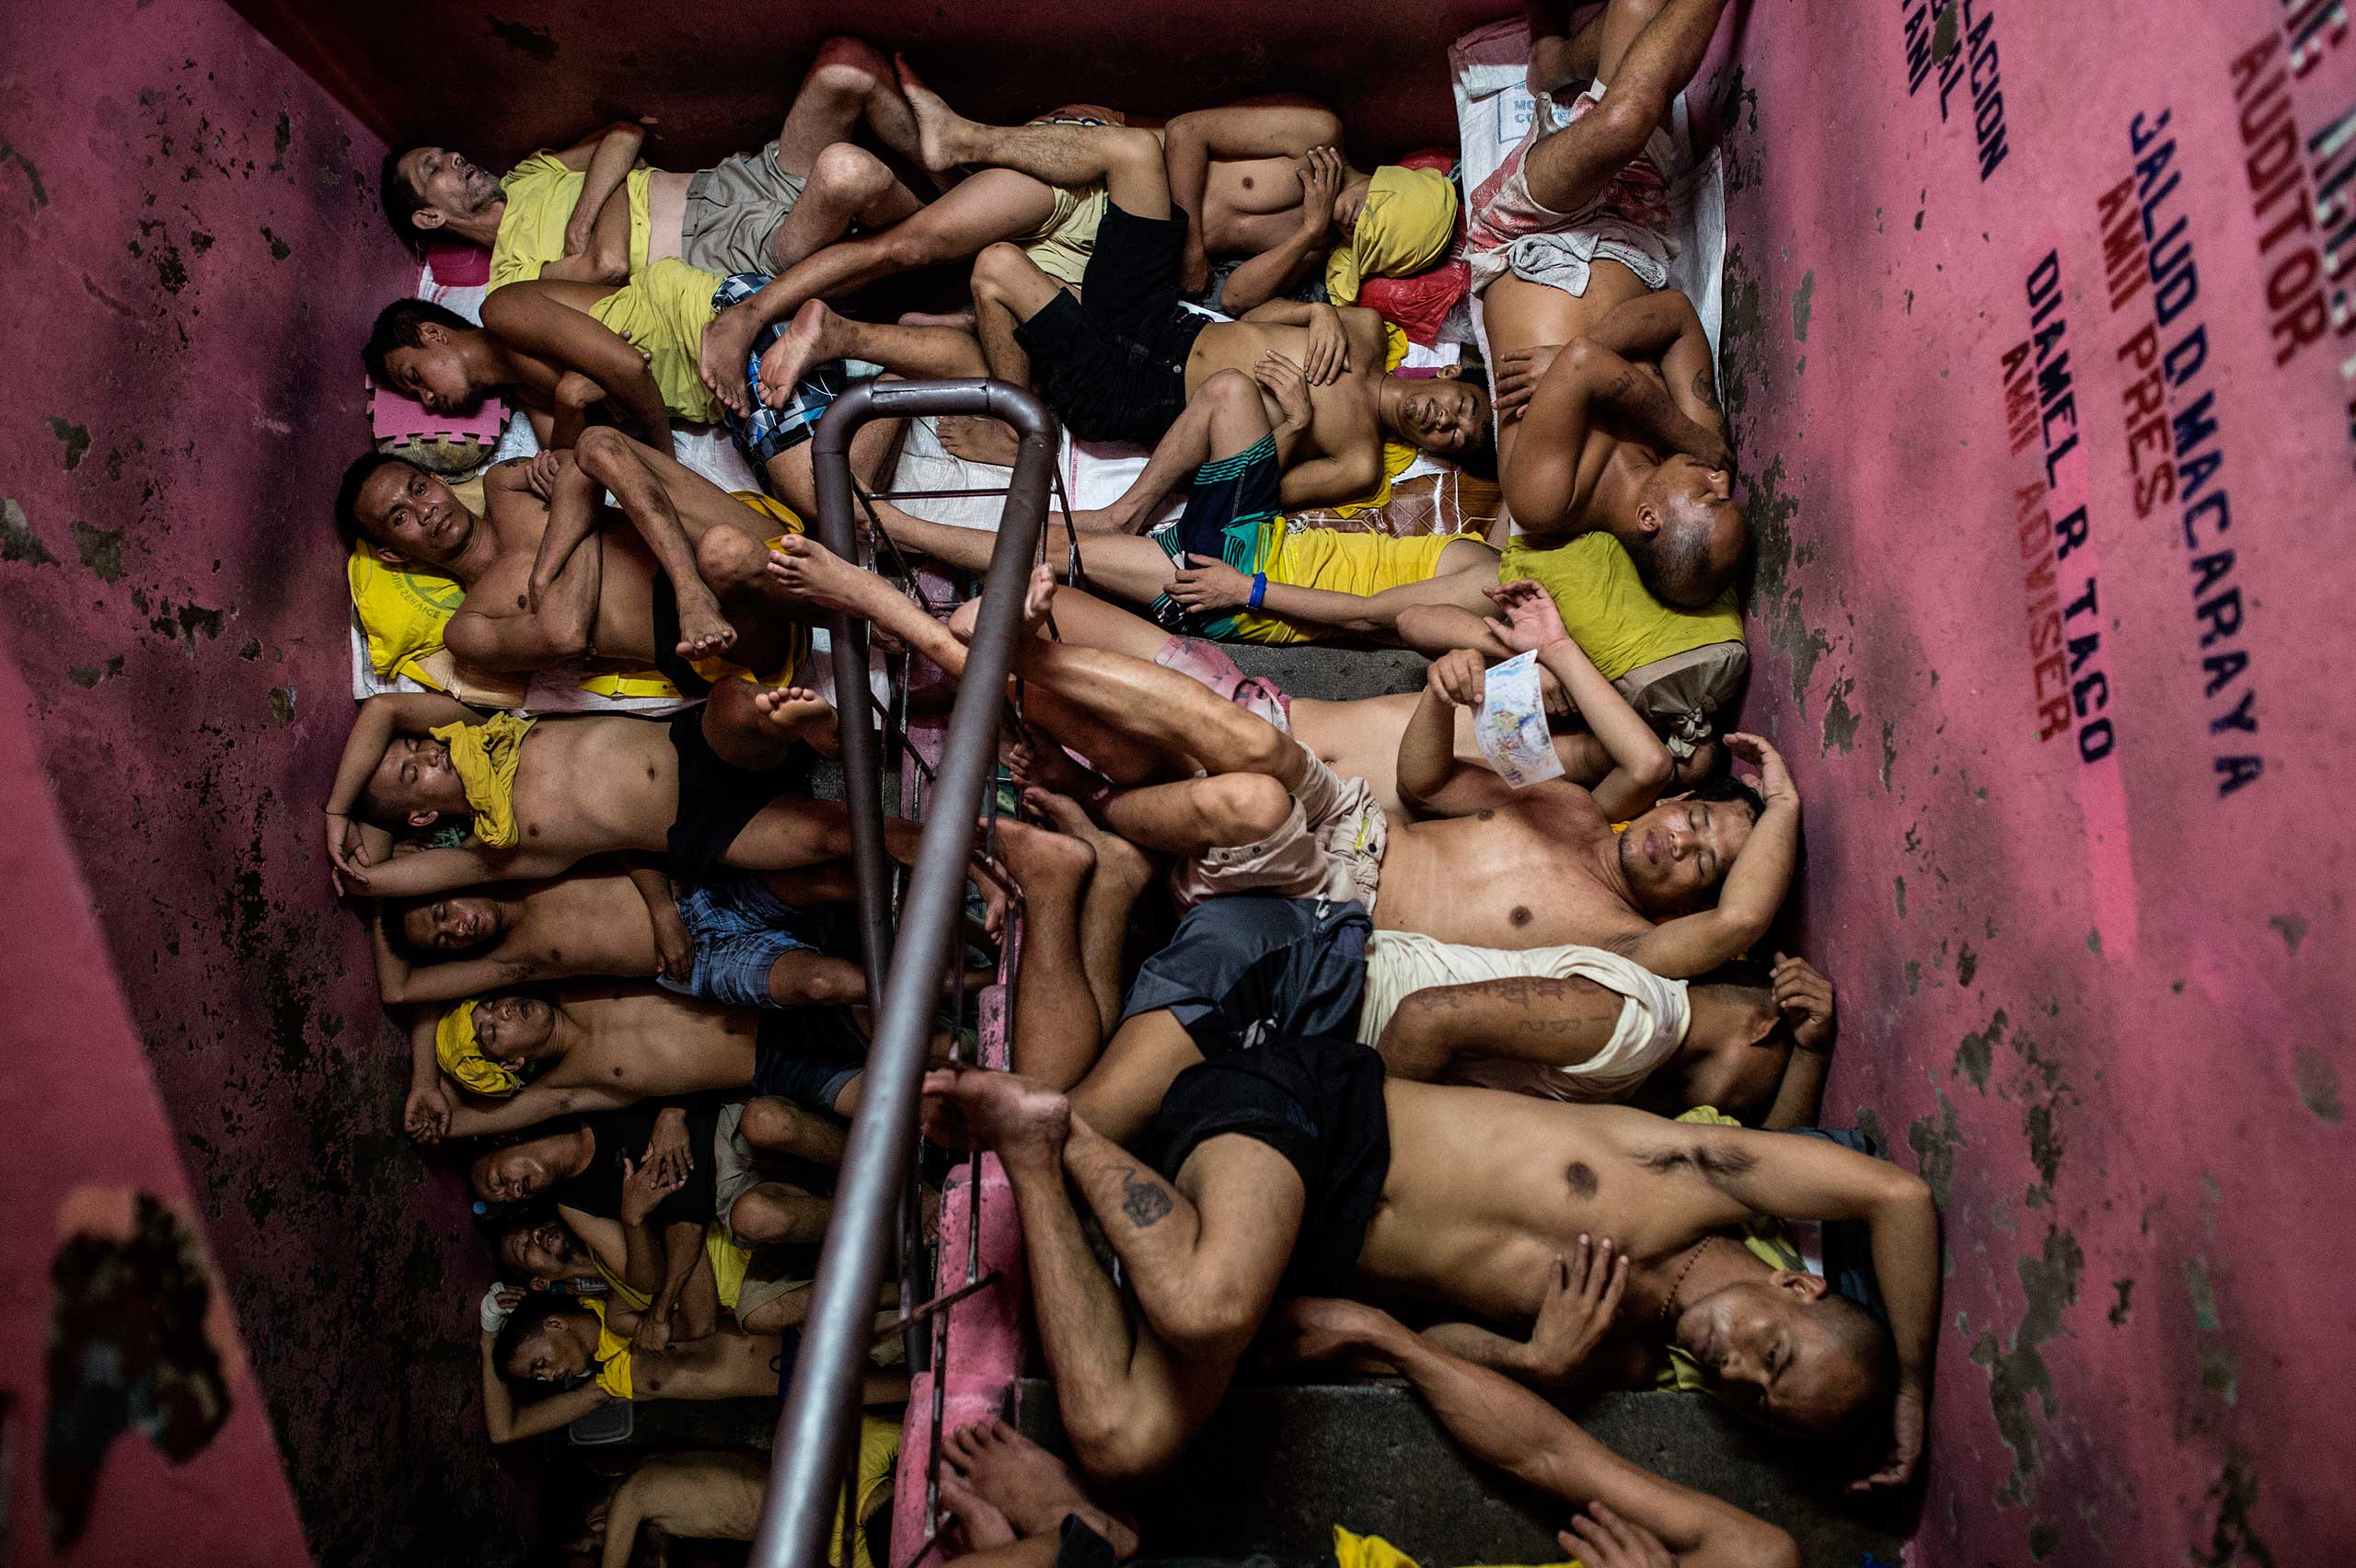 Inmates sleep on the steps of a ladder inside the Quezon City jail at night in Manila. July 21, 2016.